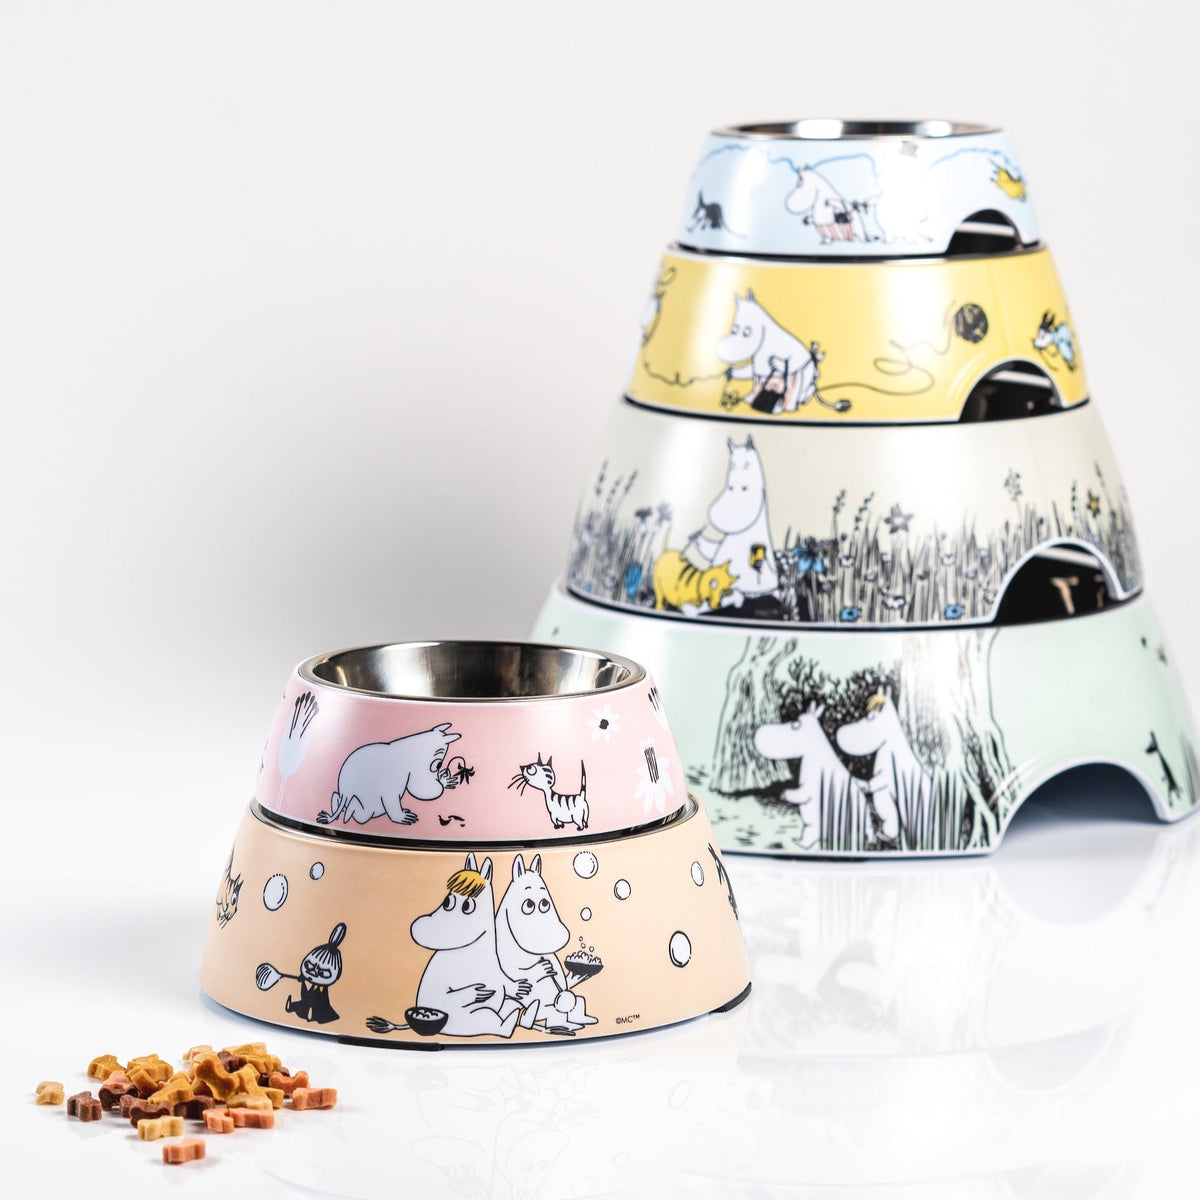 All sizes of Moomin for Pets food bowls on display. By Muurla Design